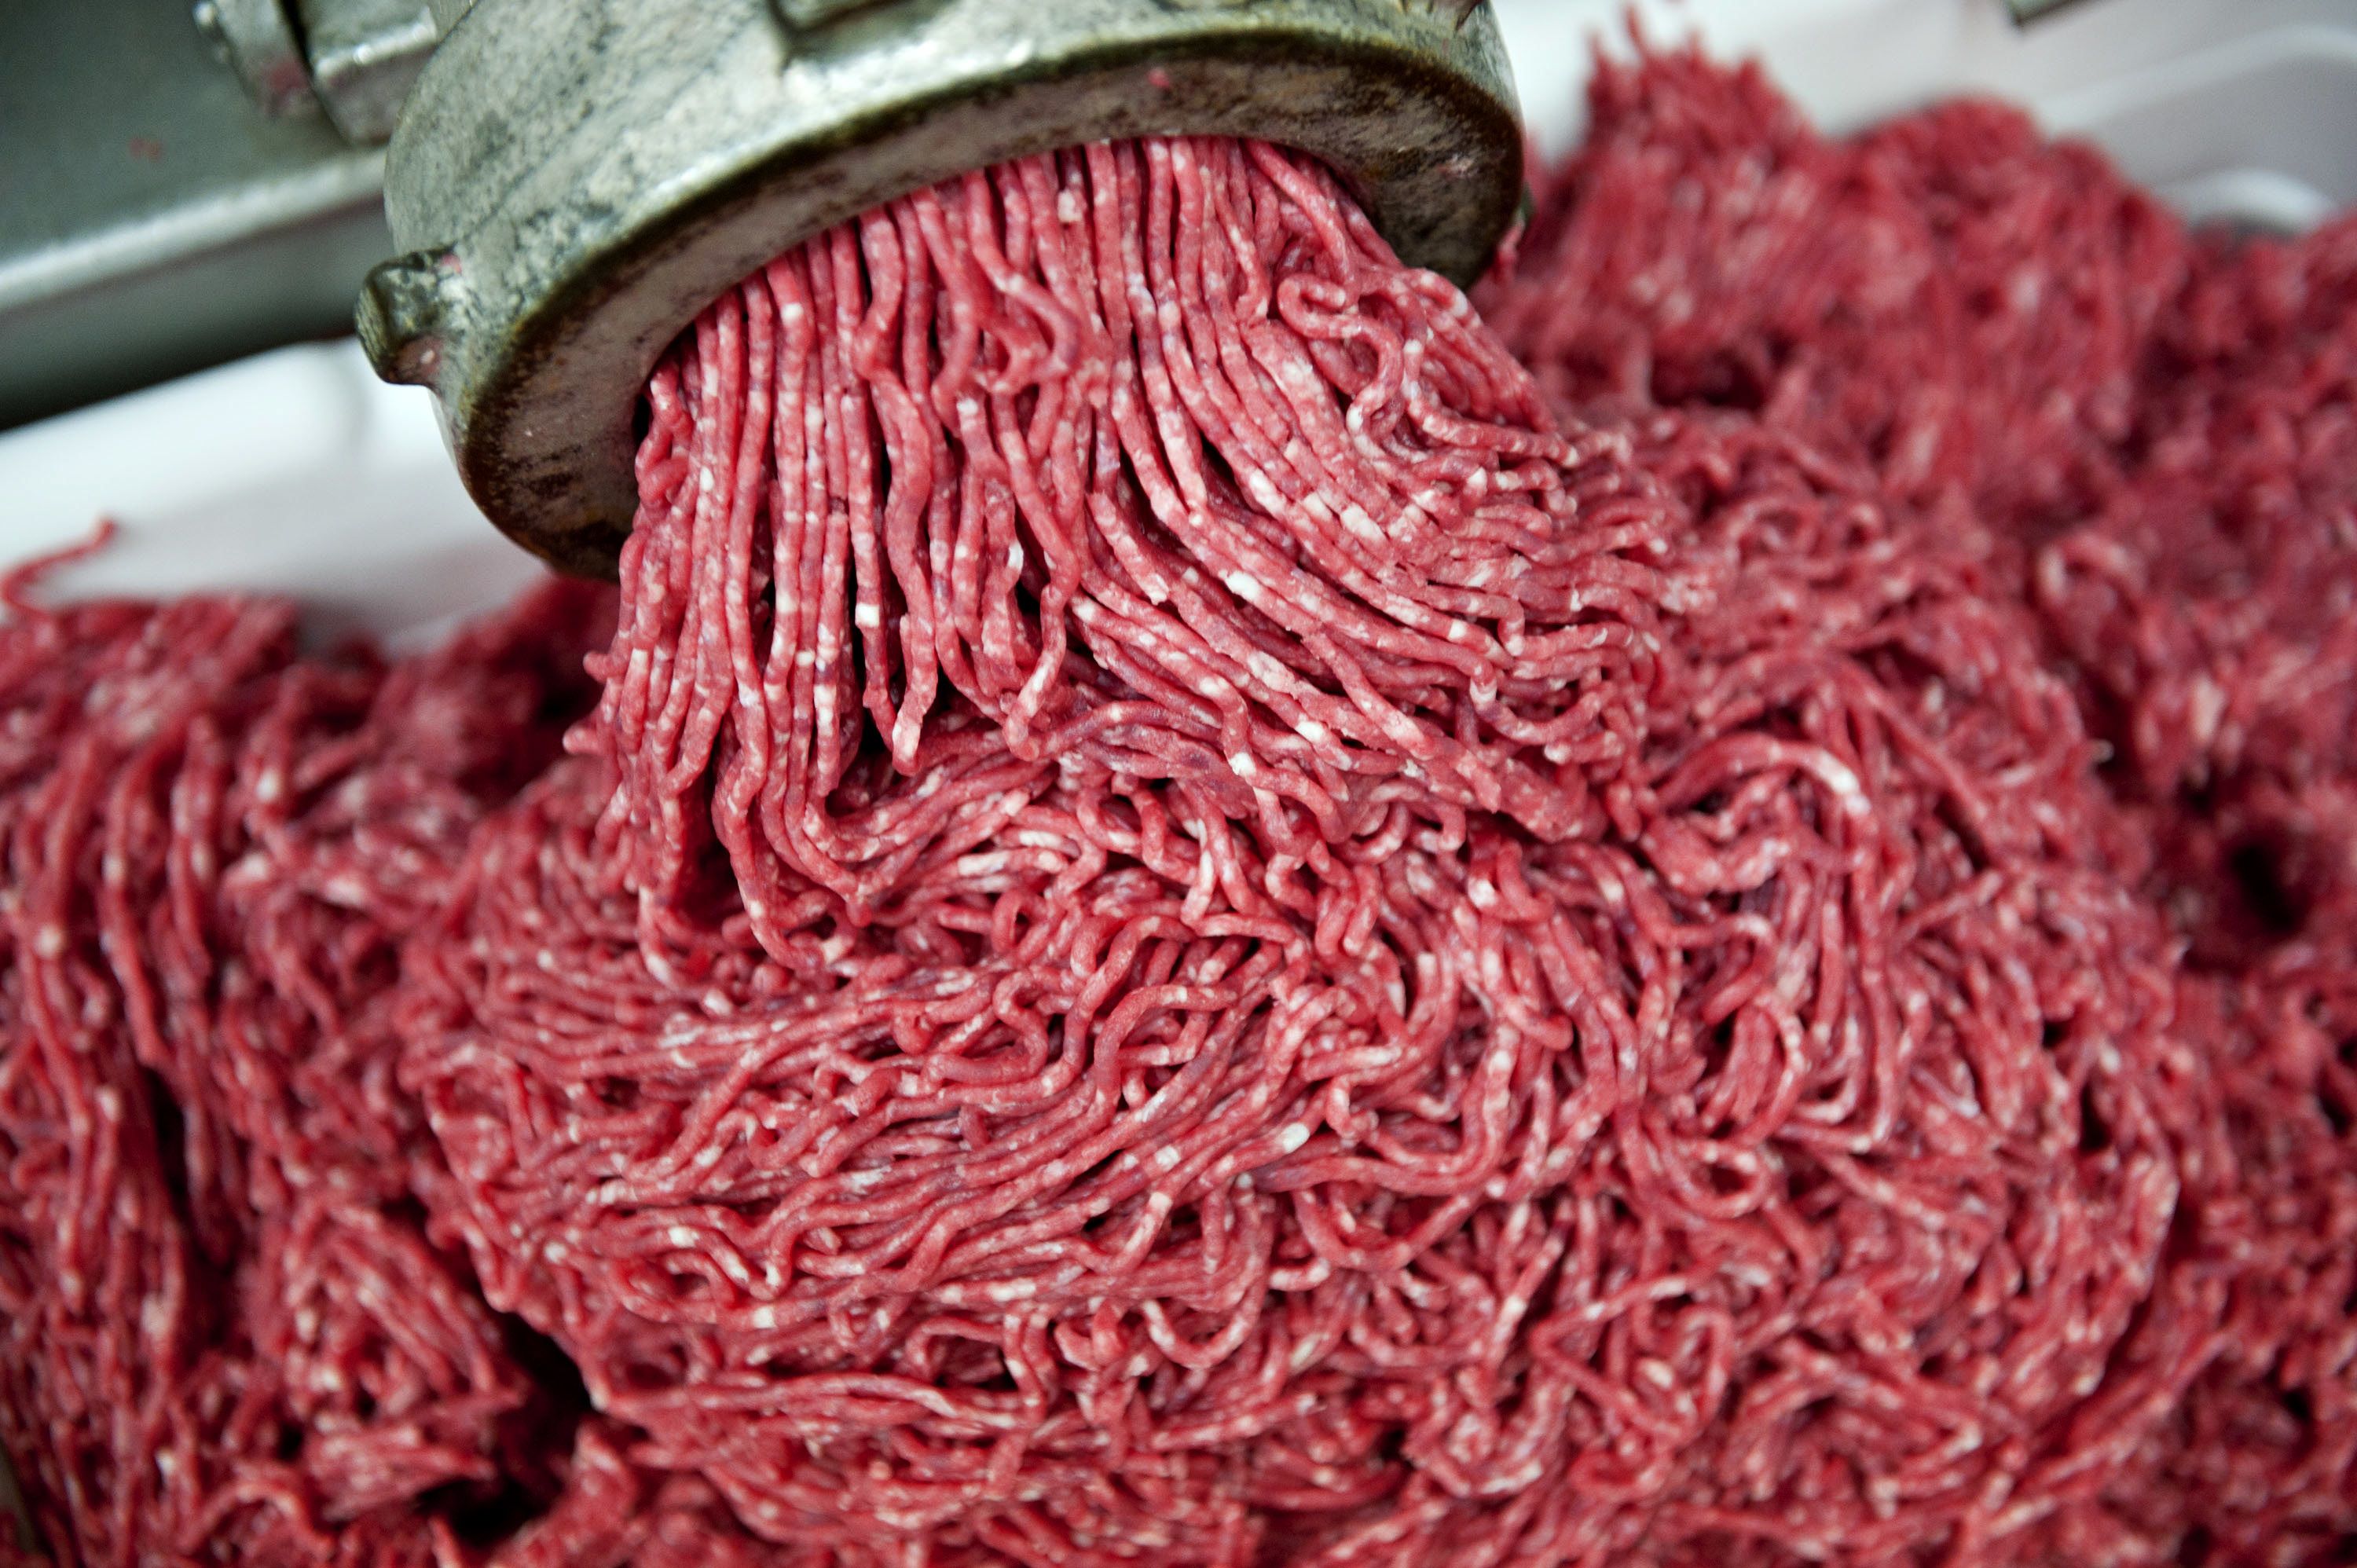 Central Valley Meat recalls ground beef products due to Salmonella Dublin contamination